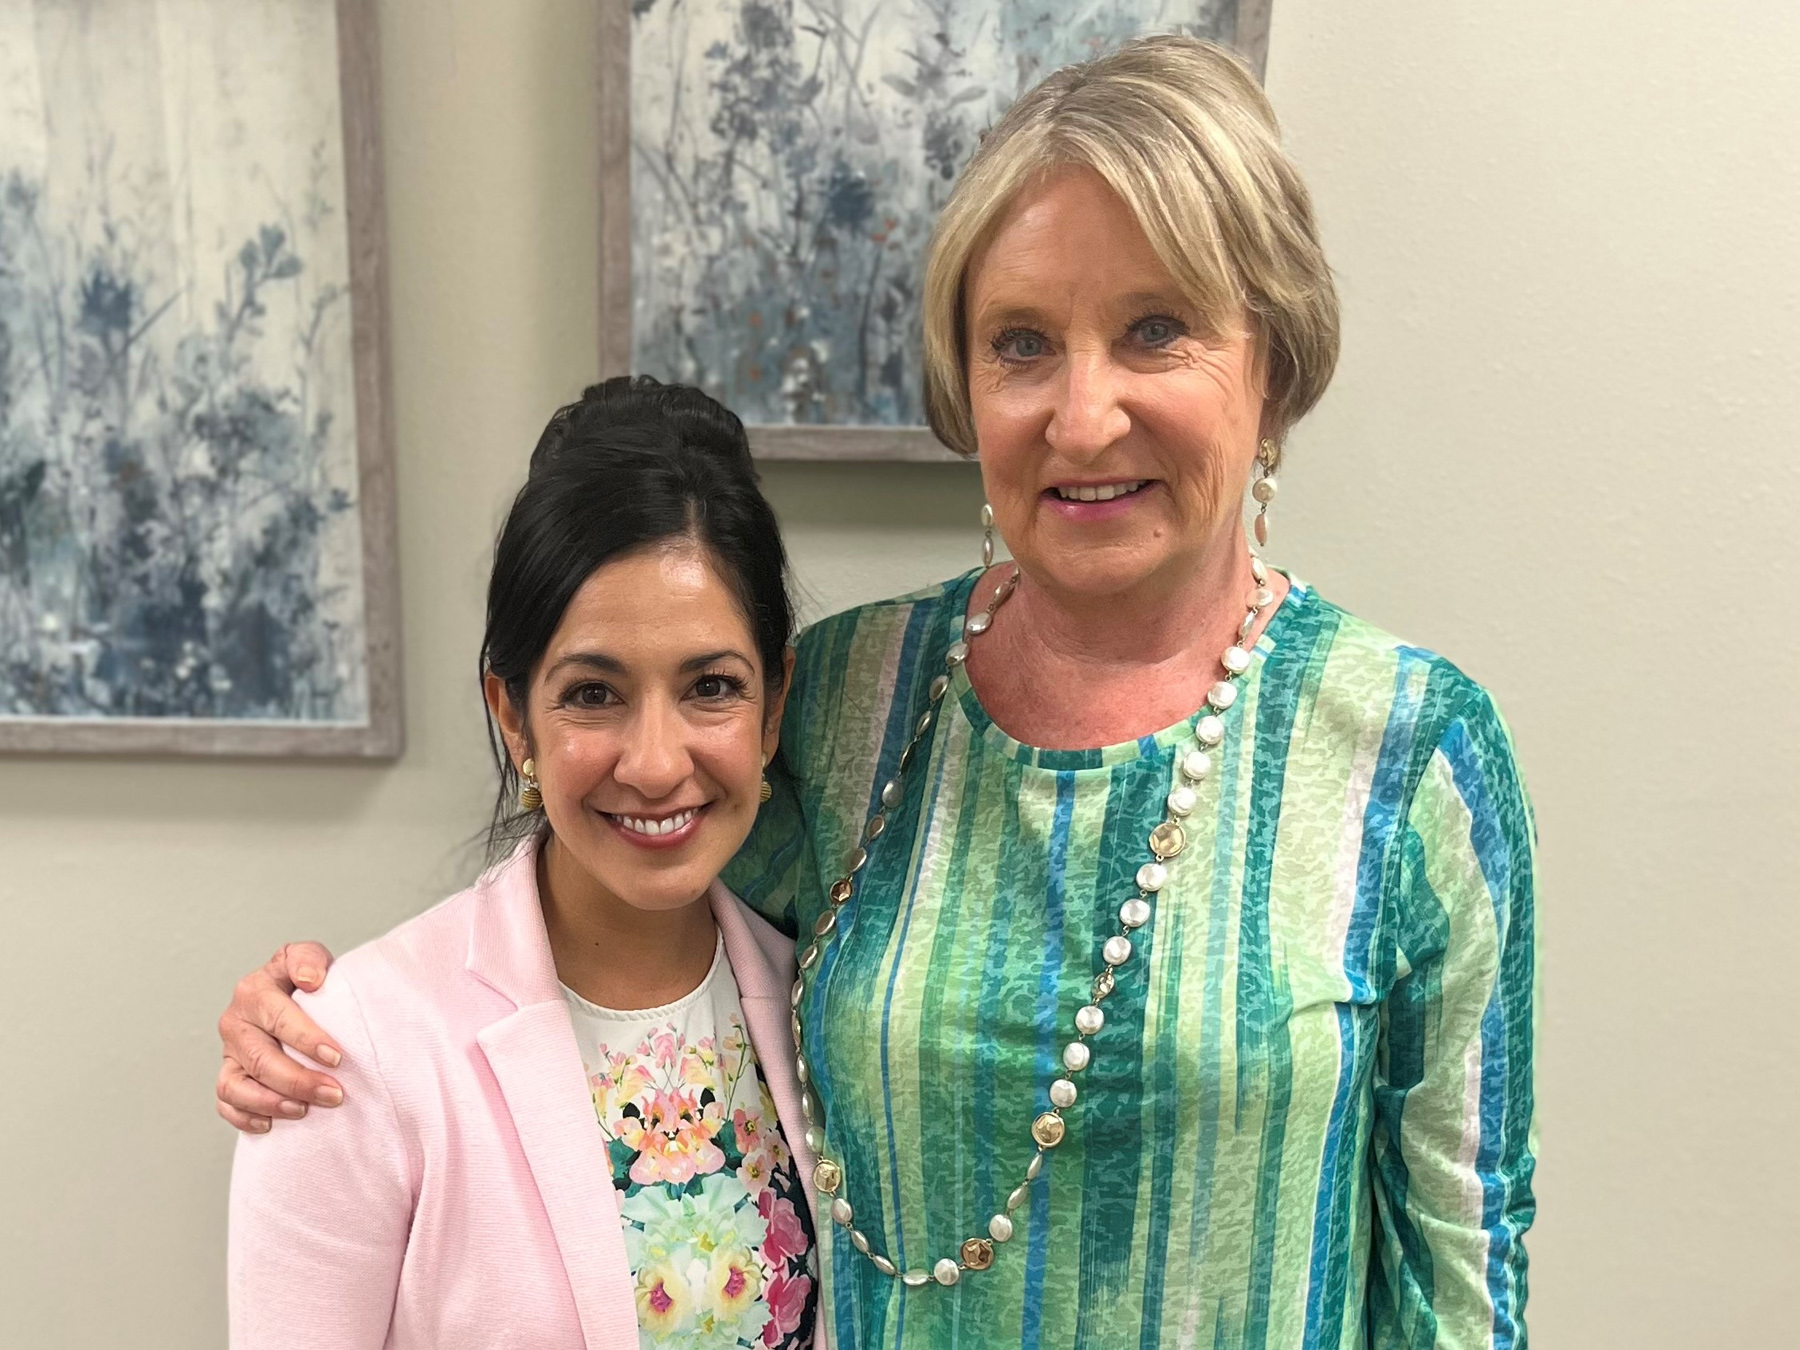 Debbie poses with Dr. Heidi Emrani, breast surgical oncologist at HCA Florida Blake Surgical Specialists